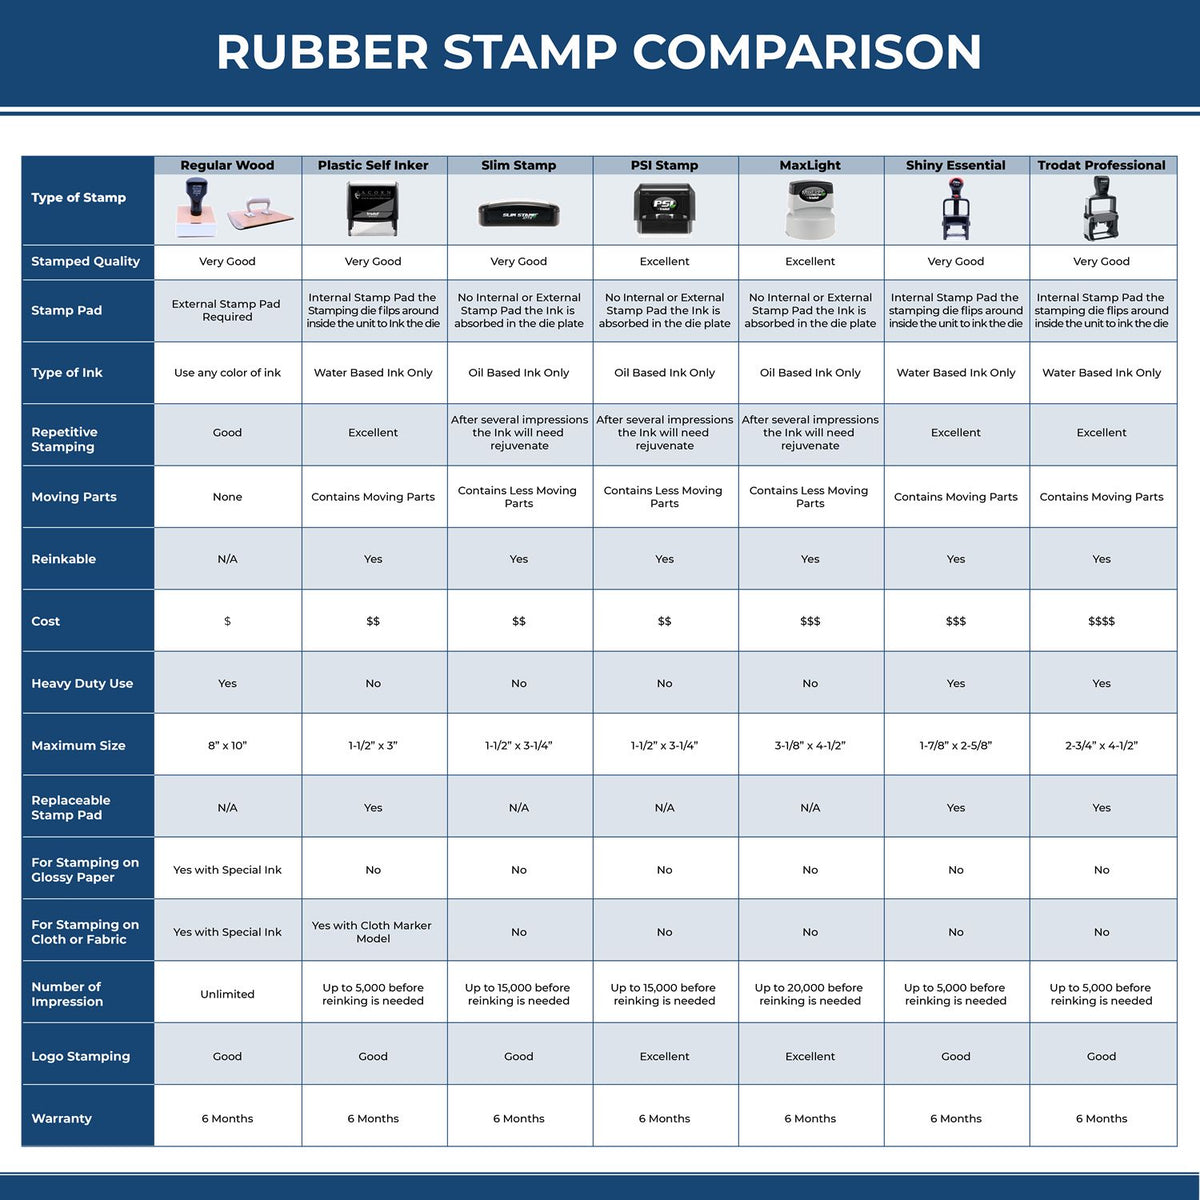 A comparison chart for the different types of mount models available for the Georgia Professional Engineer Seal Stamp.